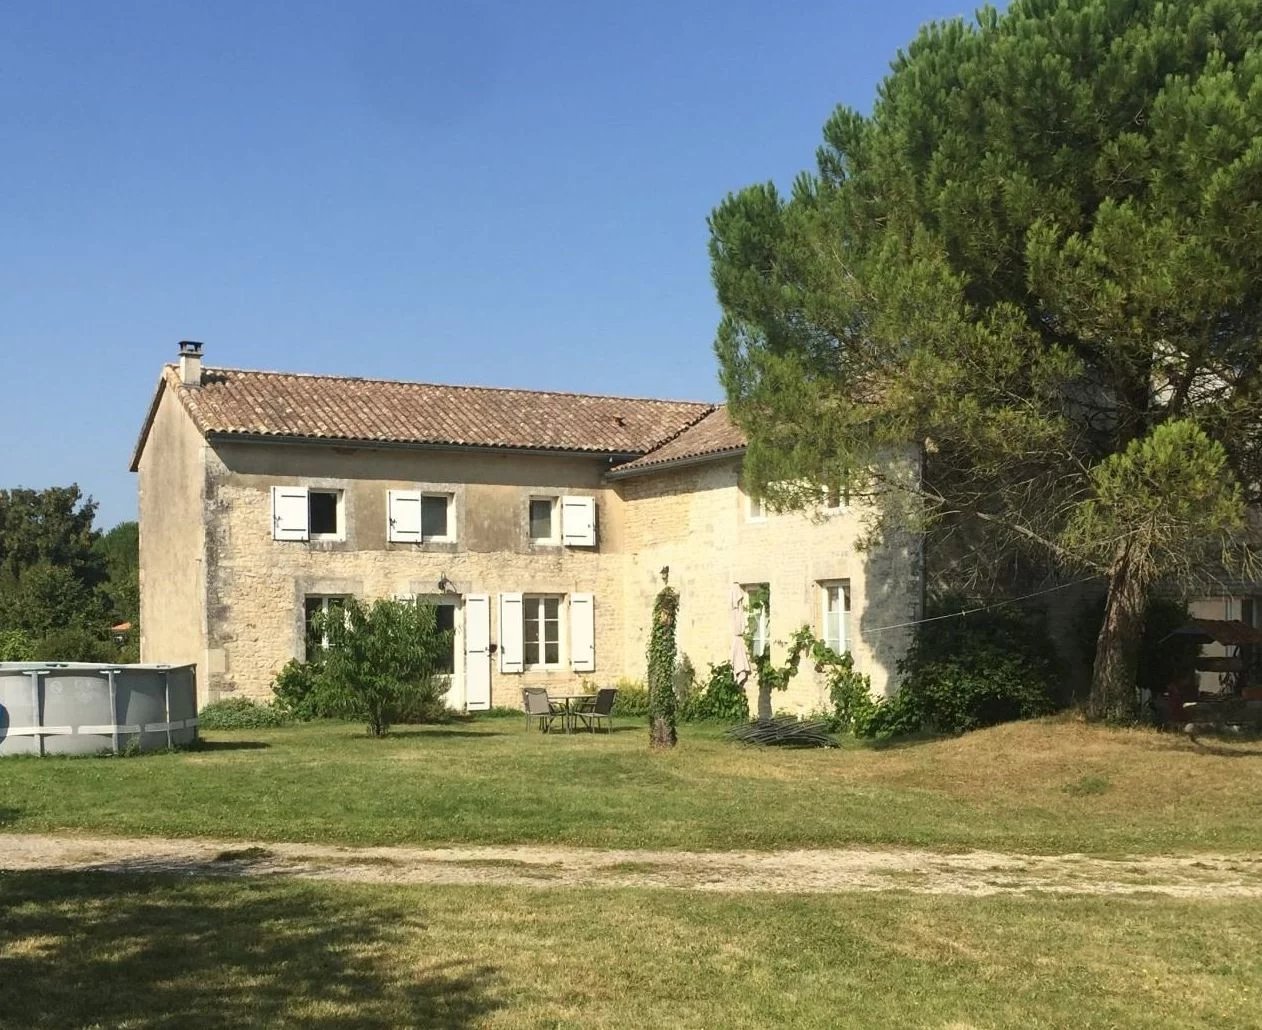 Just 5 minutes from Ruffec - large detached property with 7491m² of land